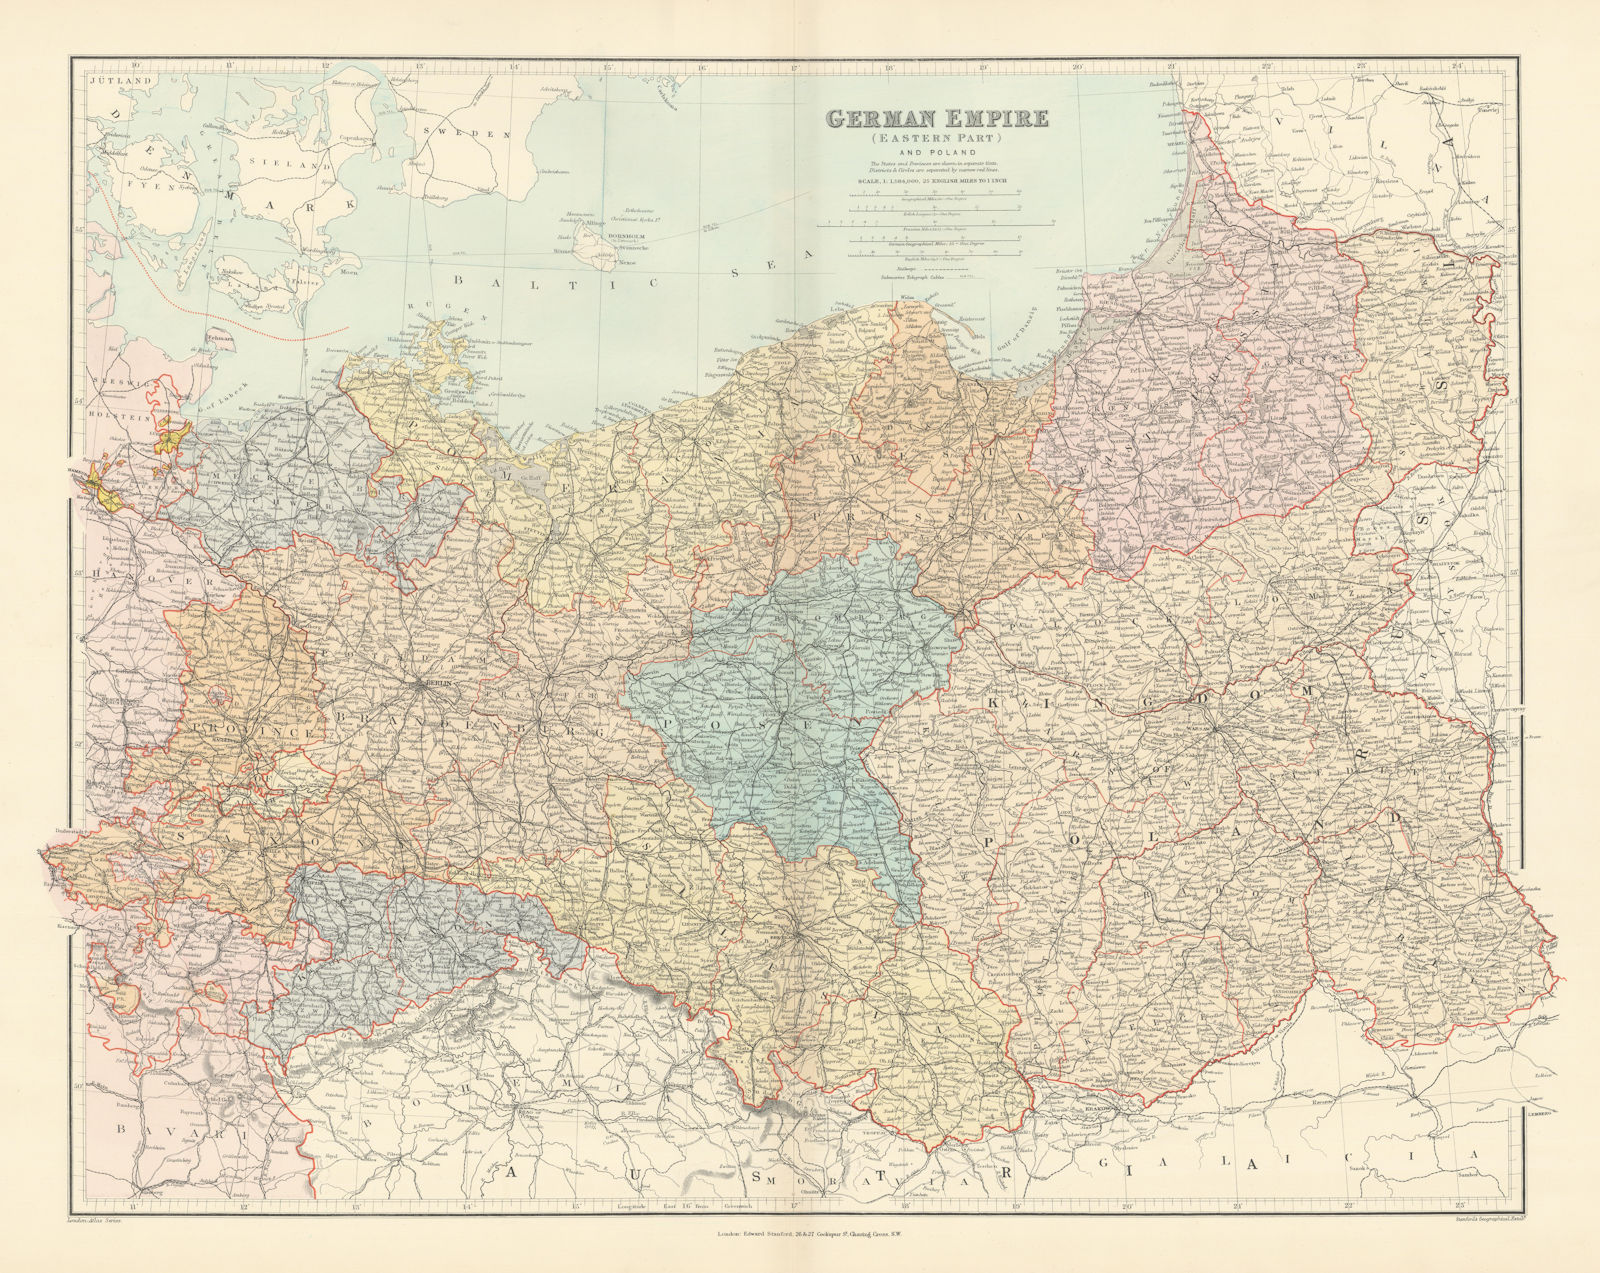 German Empire (eastern part) and Poland. Large 66x52cm. STANFORD 1896 old map